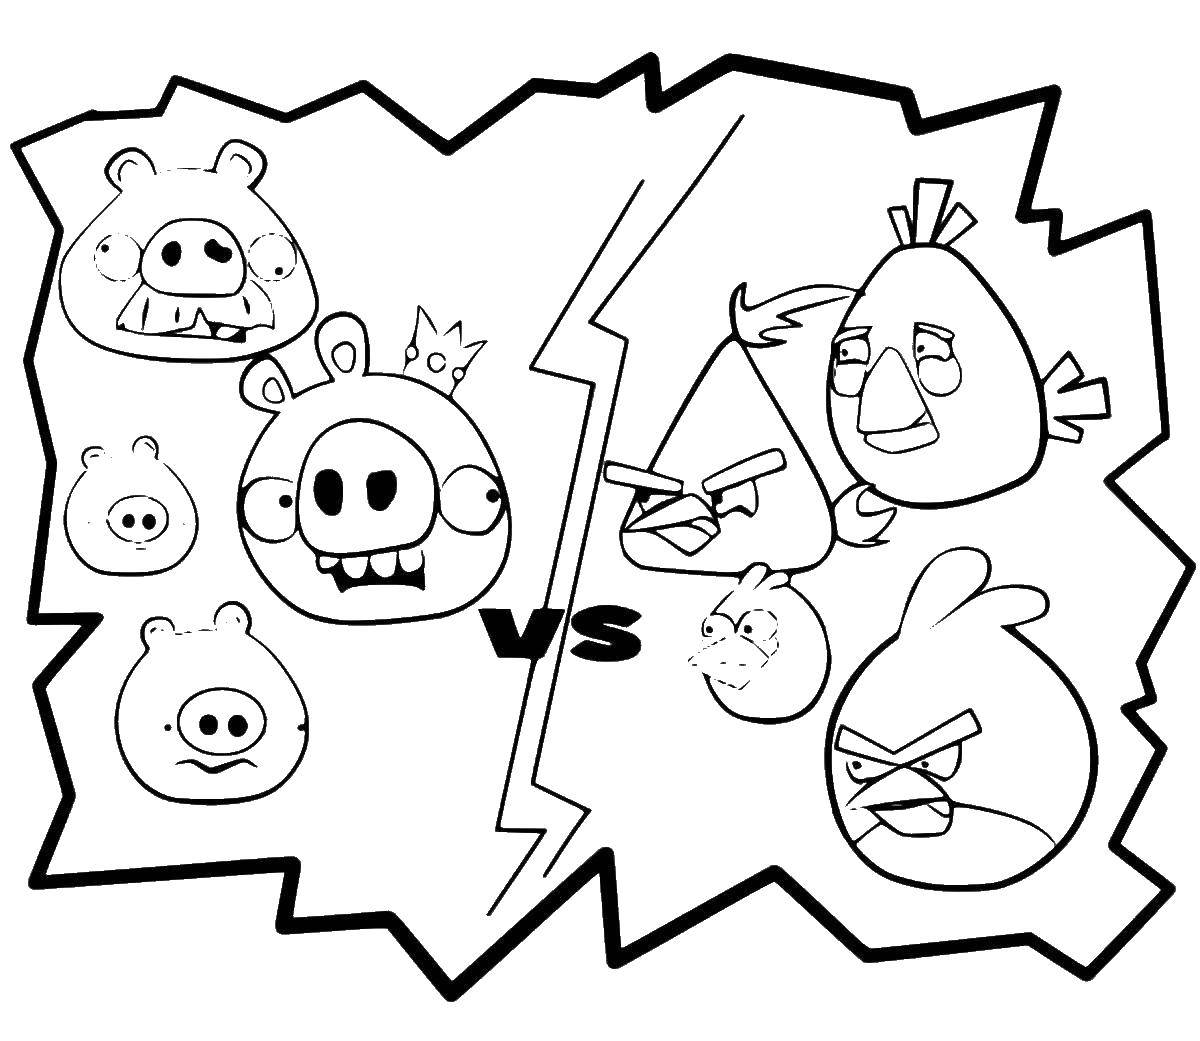 Coloring The birds and pigs from angry birds . Category angry birds. Tags:  Games, Angry Birds .